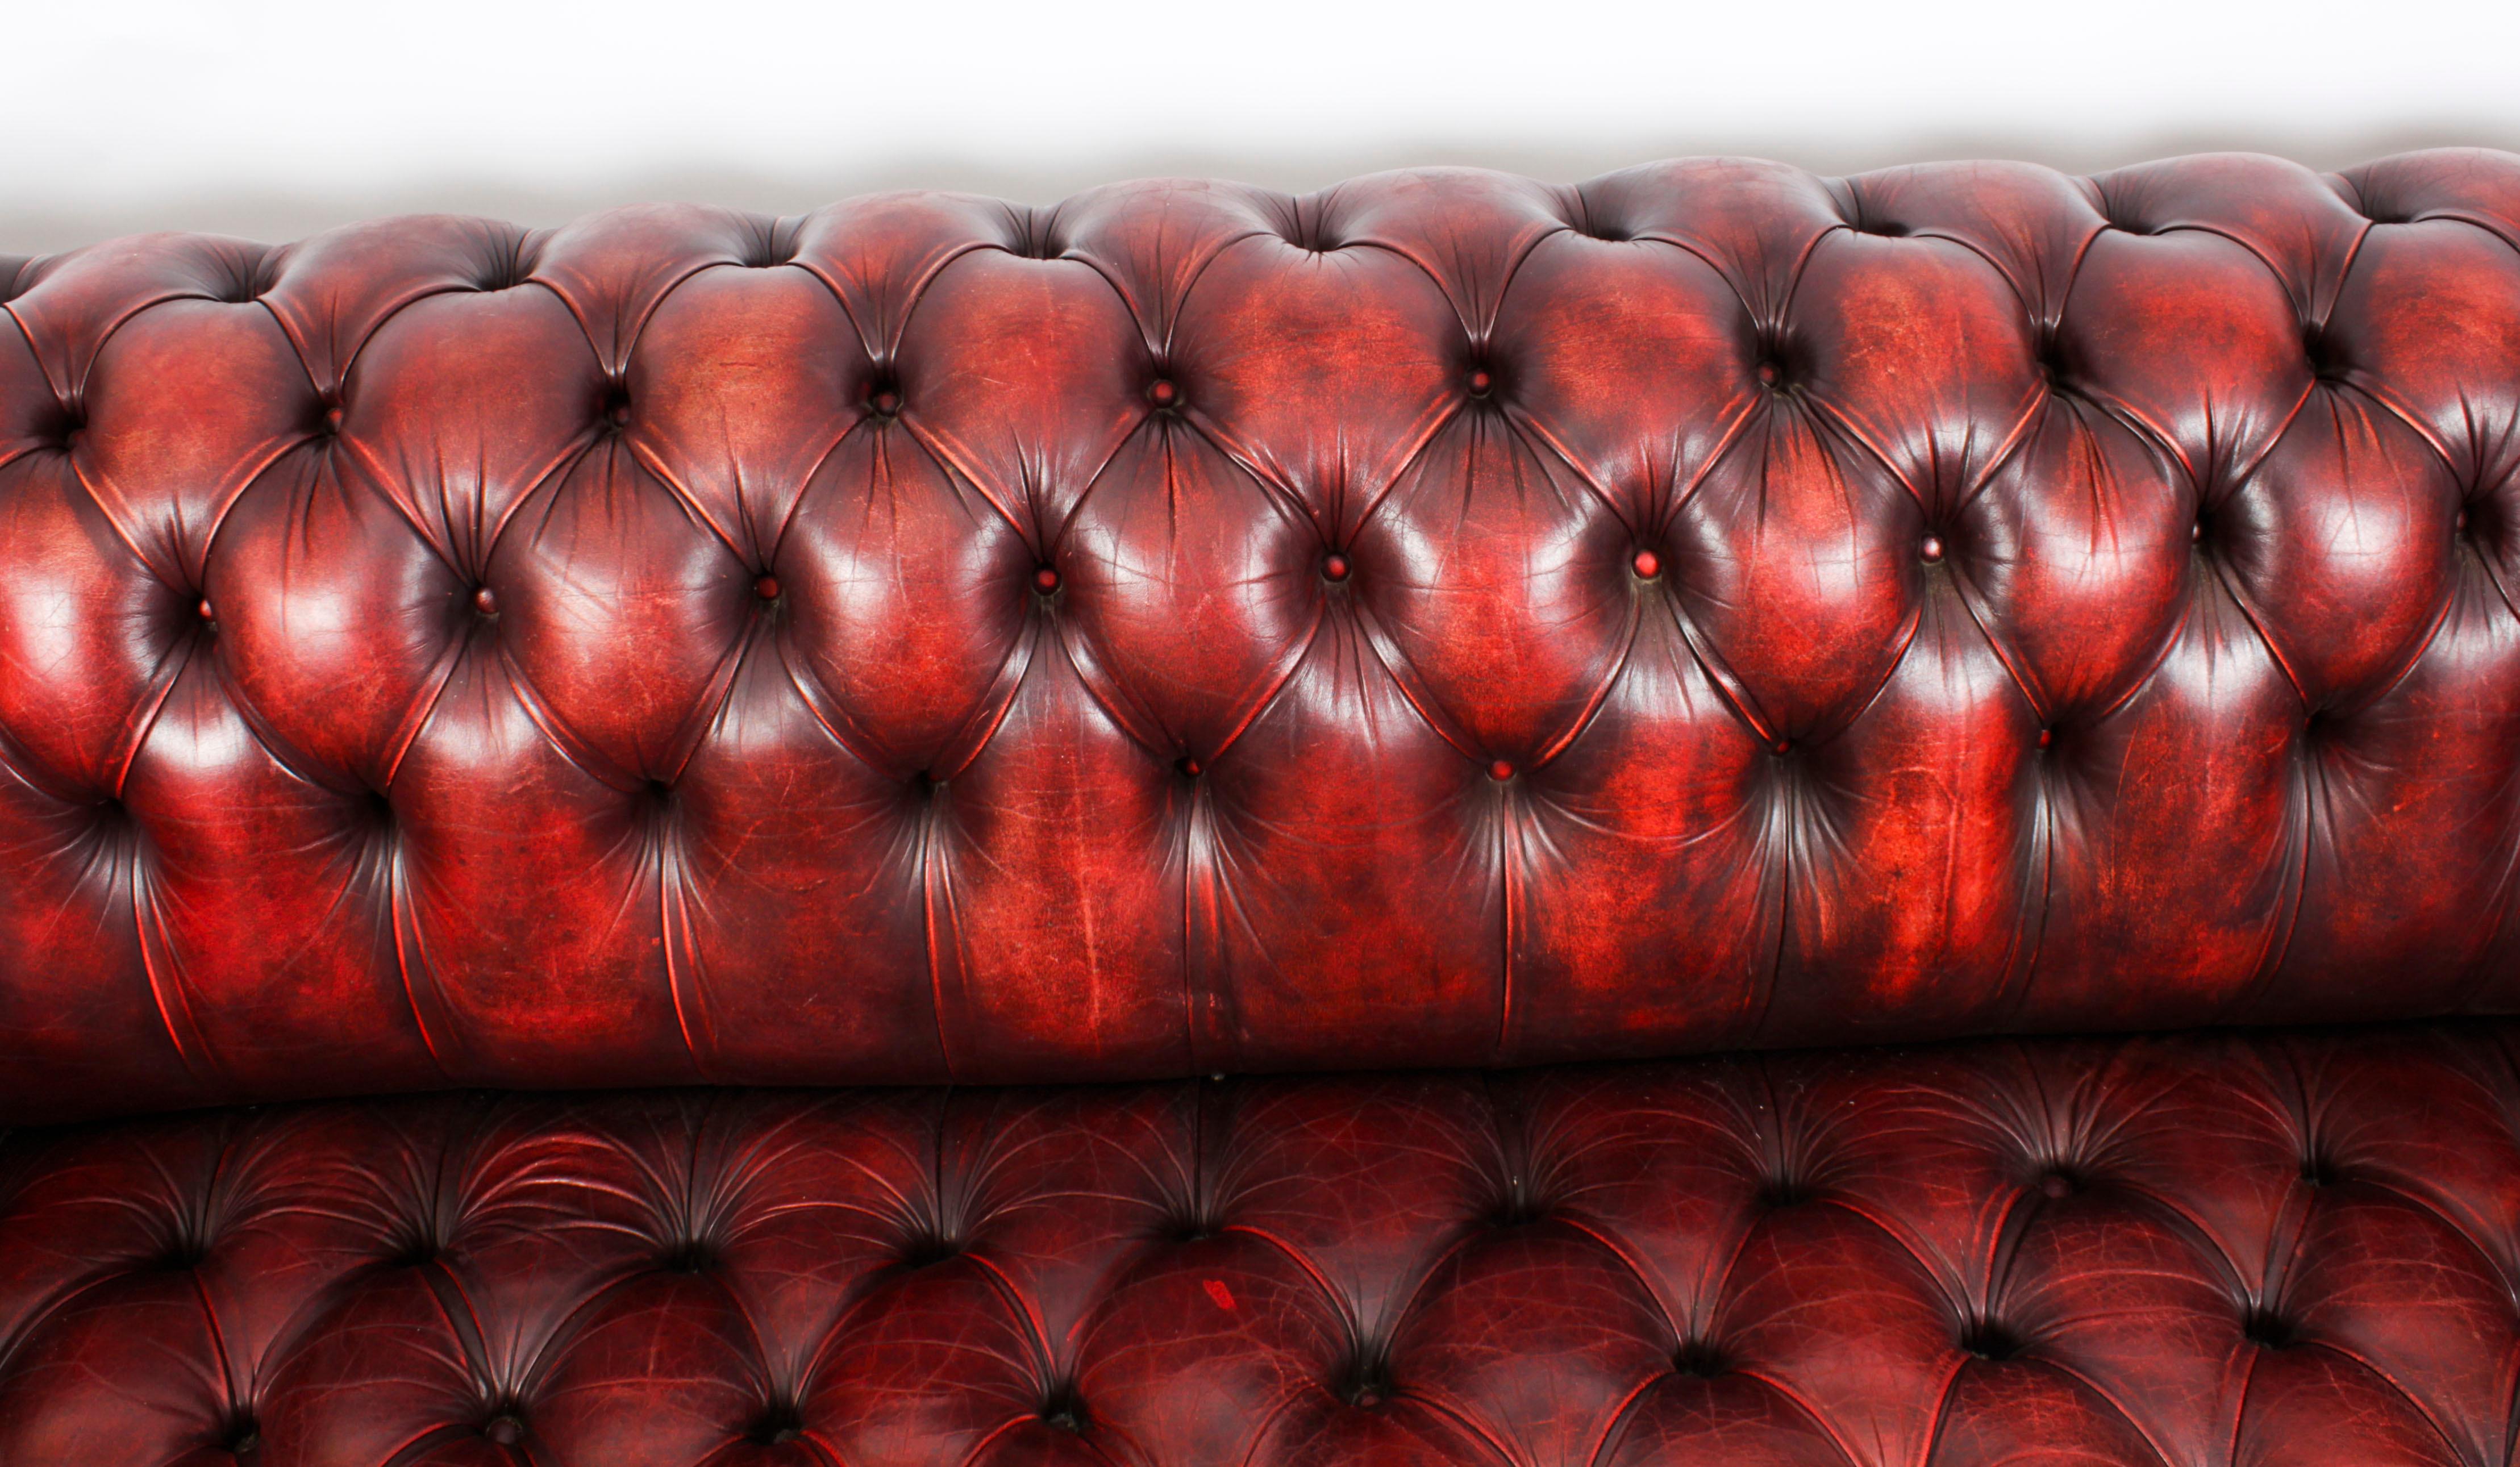 This is a superb large vintage English leather 'Chesterfield' sofa, circa 1950 in date.

This fine quality button back and seat sofa is upholstered in burgundy hide and has large robust rolling arms with a shaped barrel back of heavy contoured